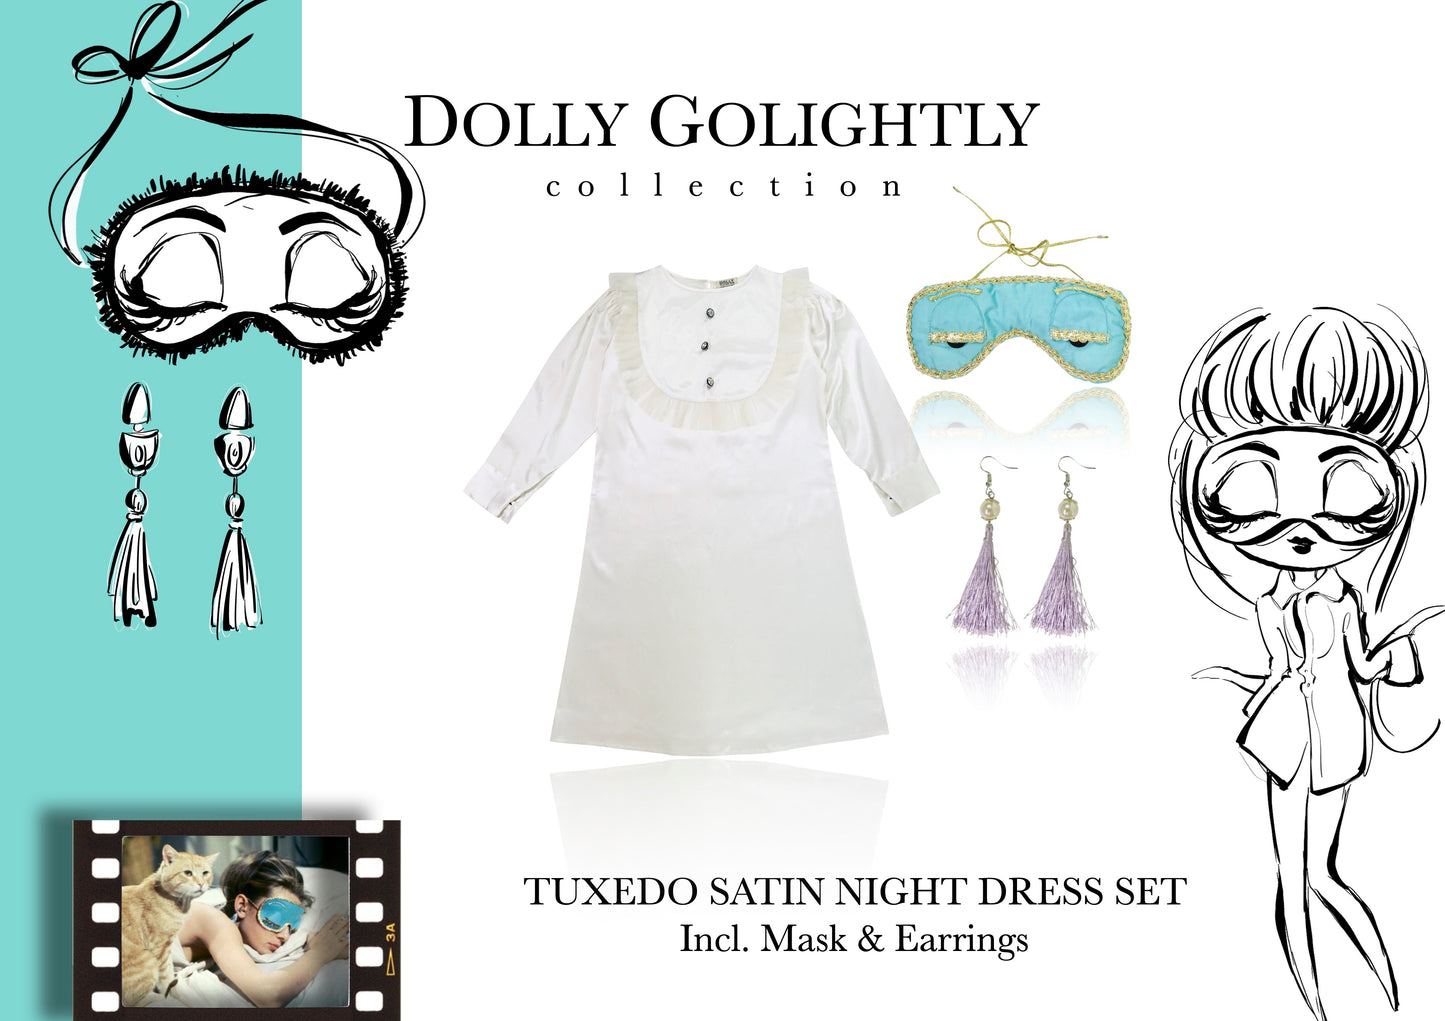 DOLLY GOLIGHTLY Breakfast @ Tiffany's ginger 'CAT' plush toy collectible